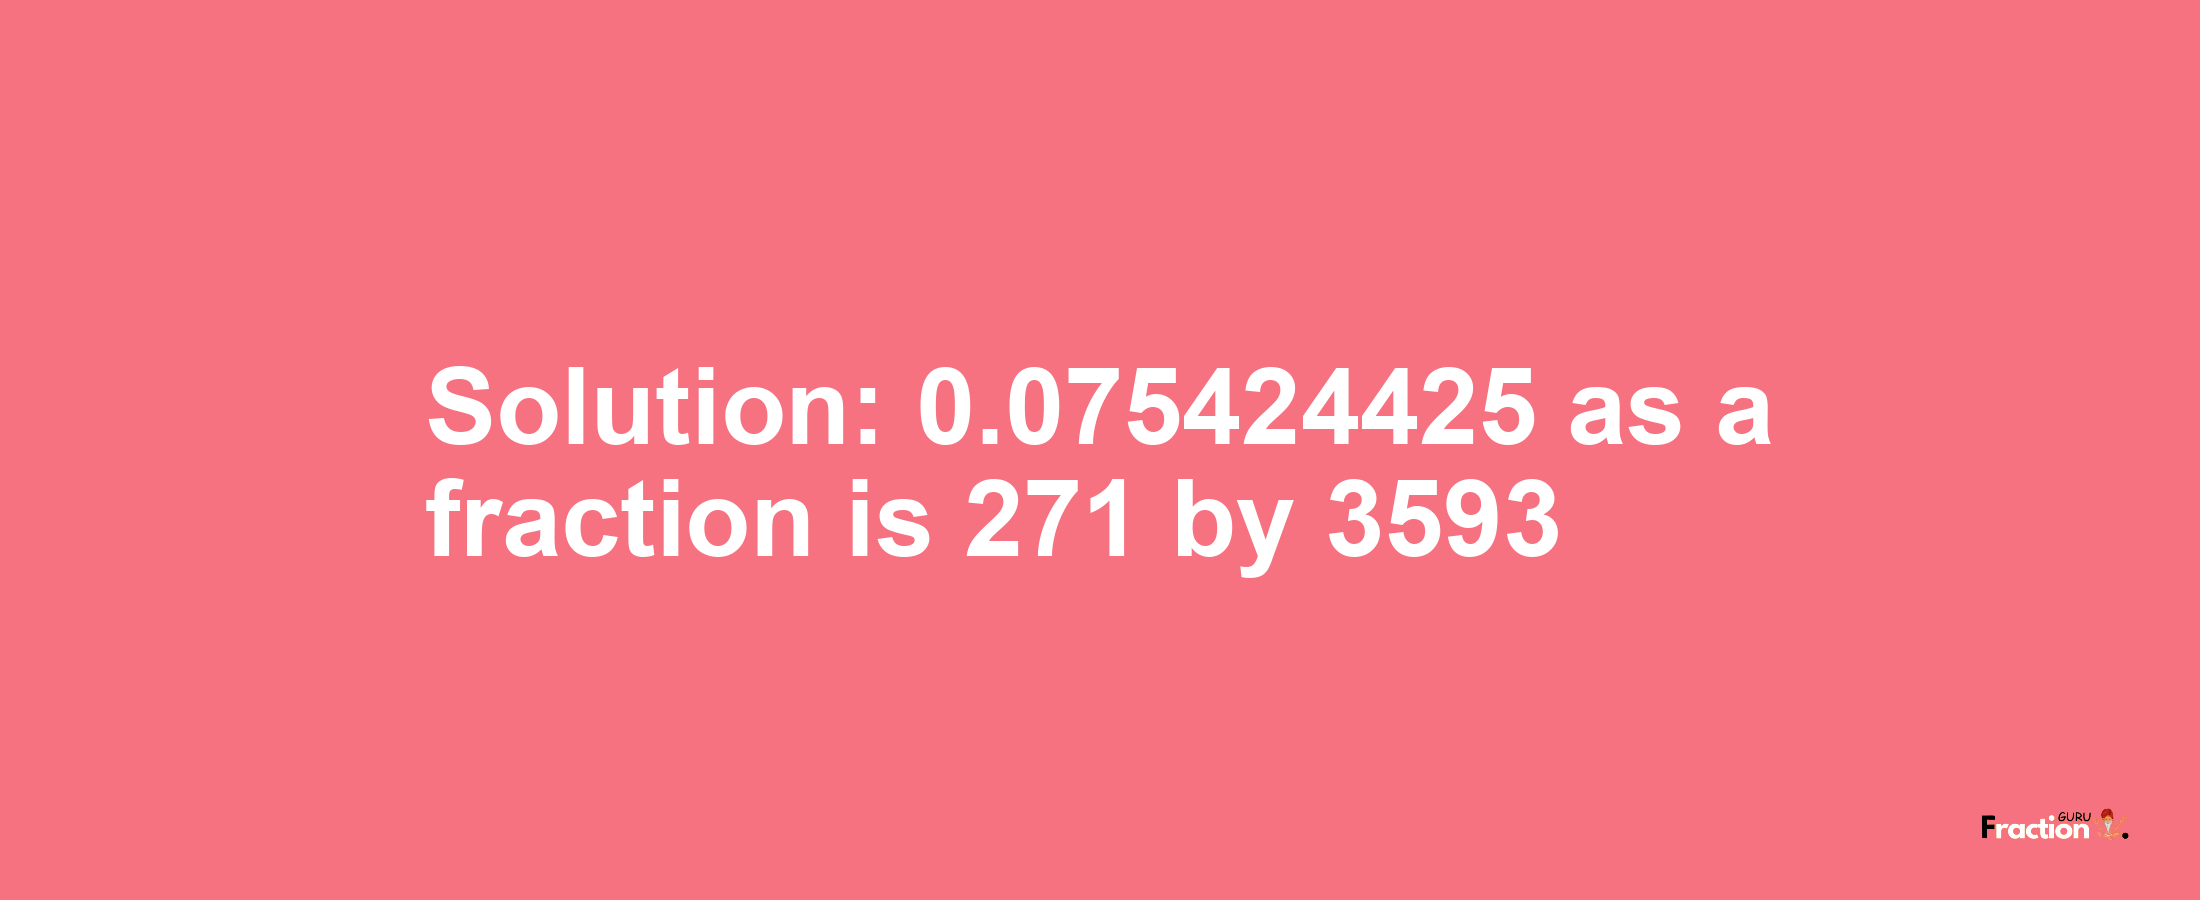 Solution:0.075424425 as a fraction is 271/3593